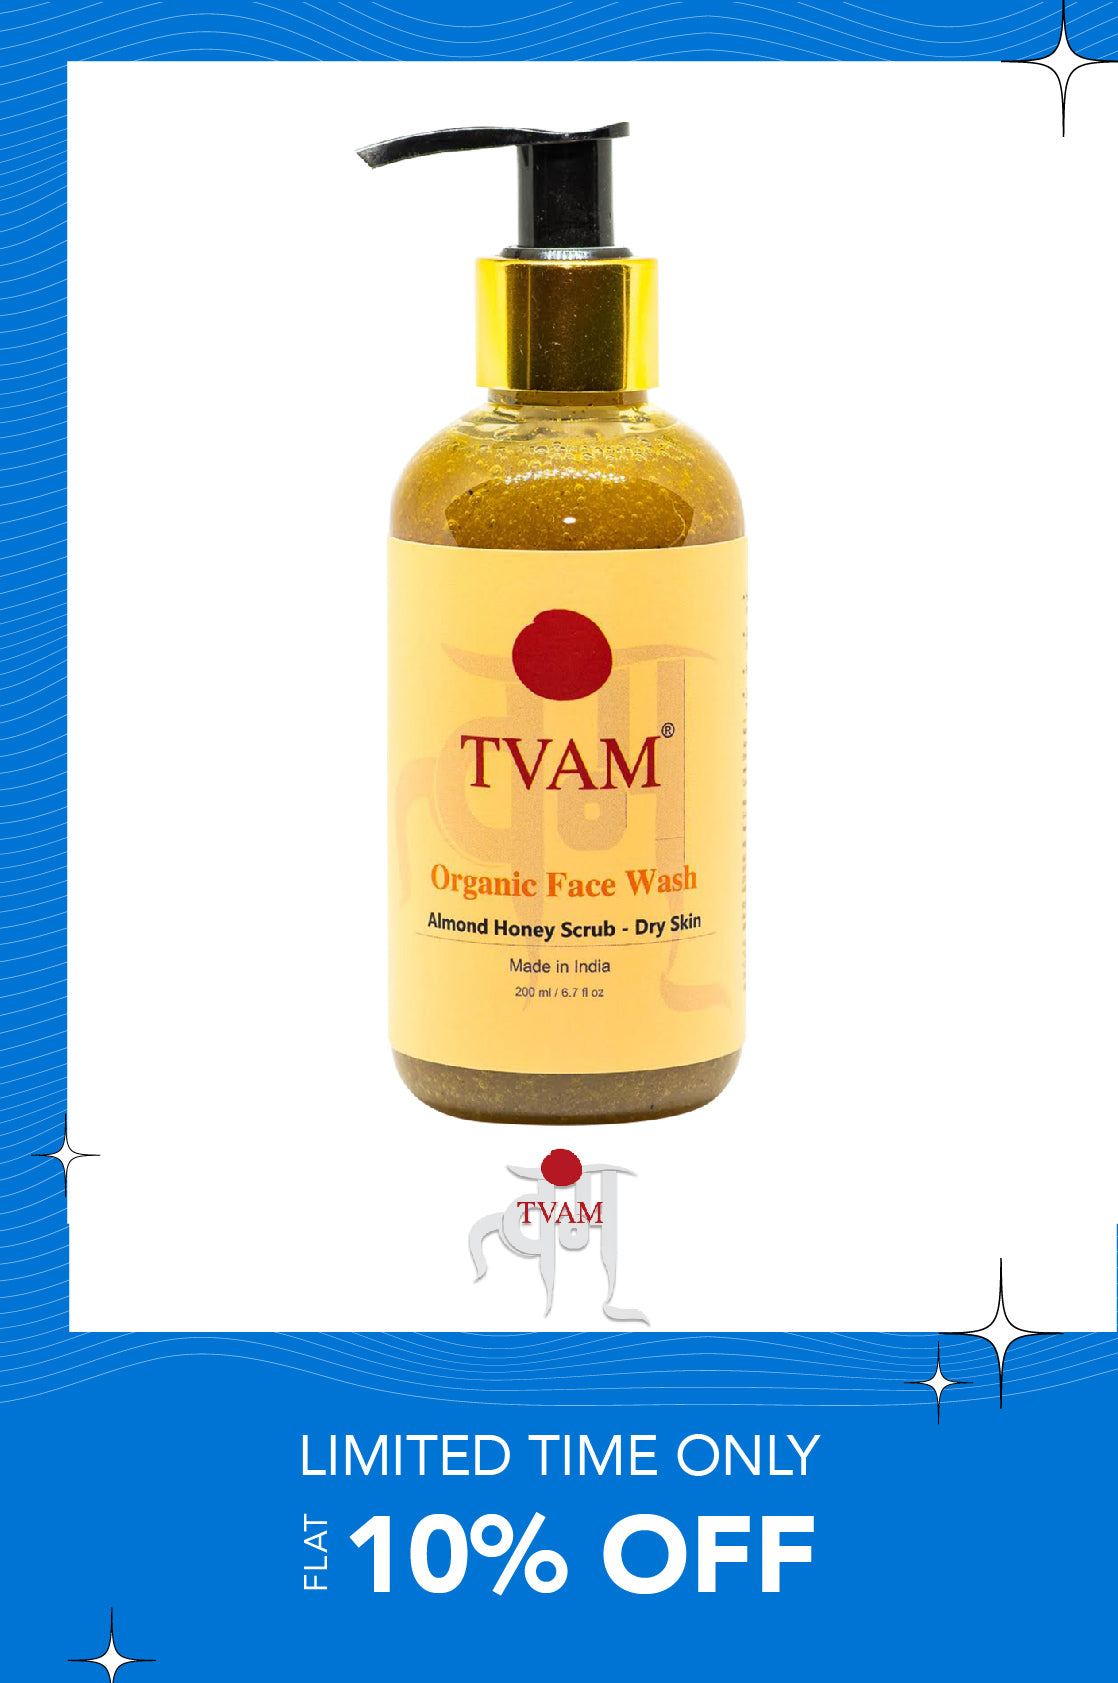 Shop Ayurvedic Skincare products from Tvam on SublimeLife.in